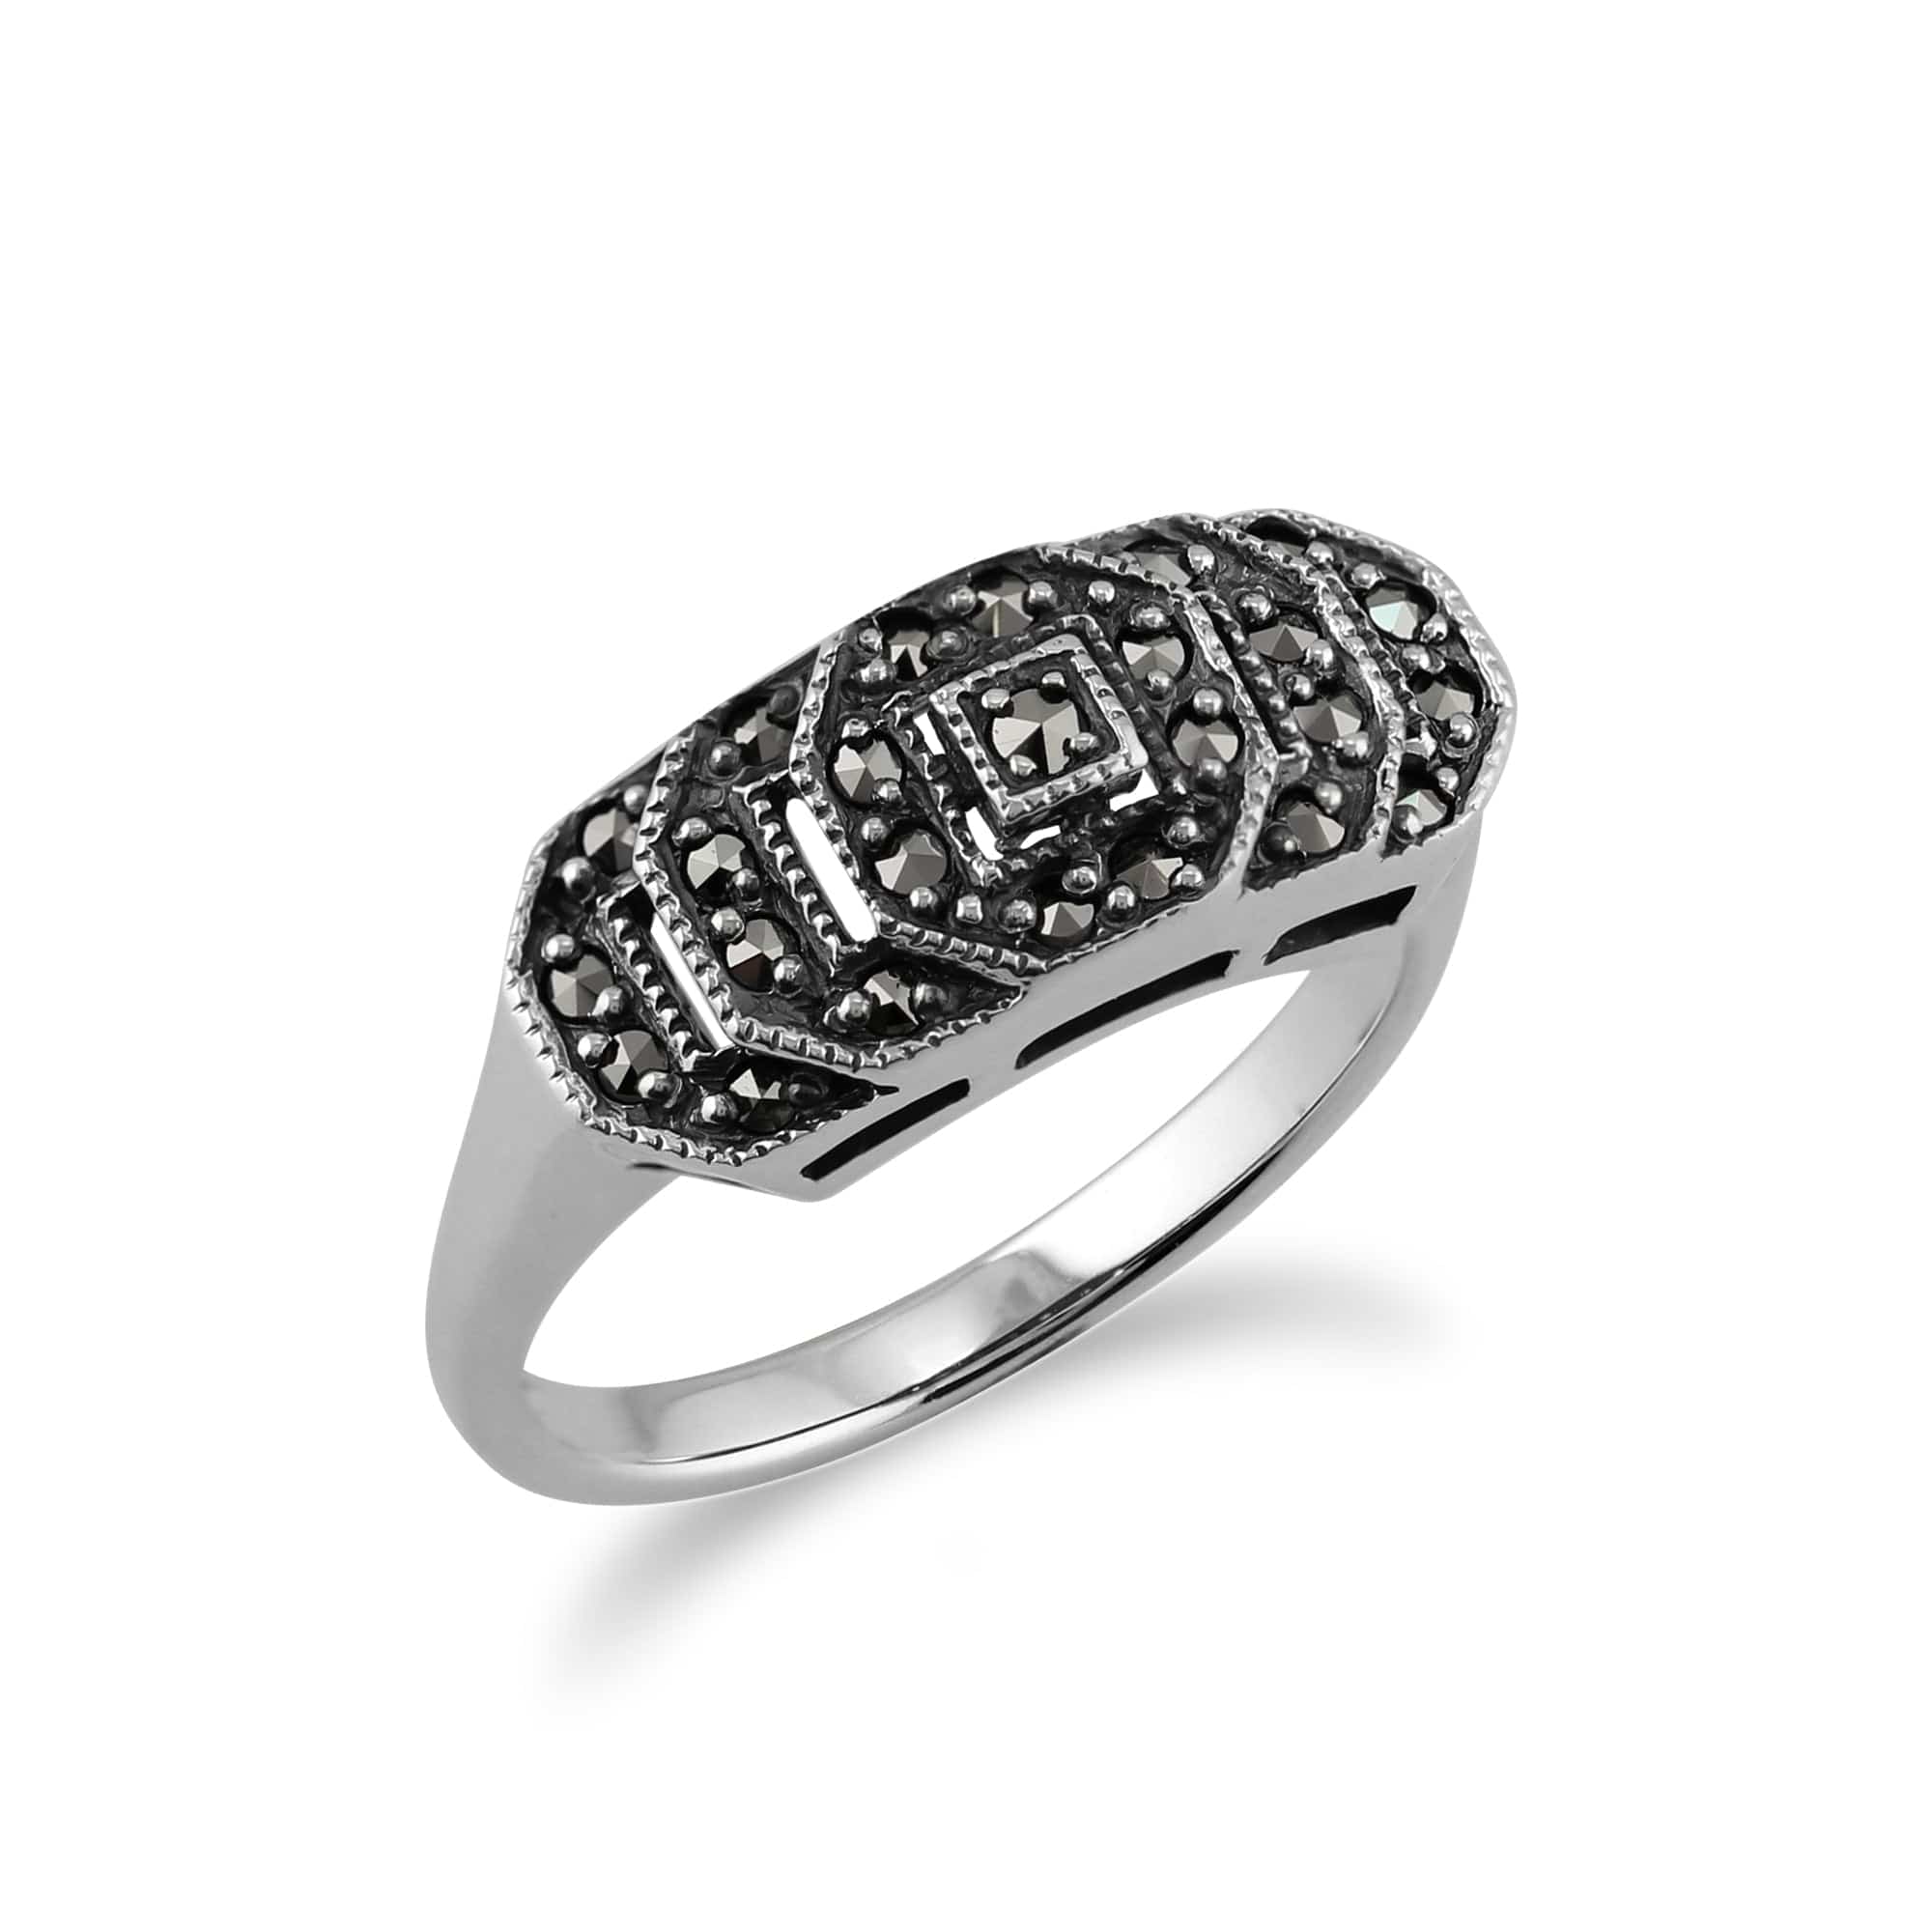 27085 Art Deco Style Round Marcasite Stepped Ring in 925 Sterling Silver 4